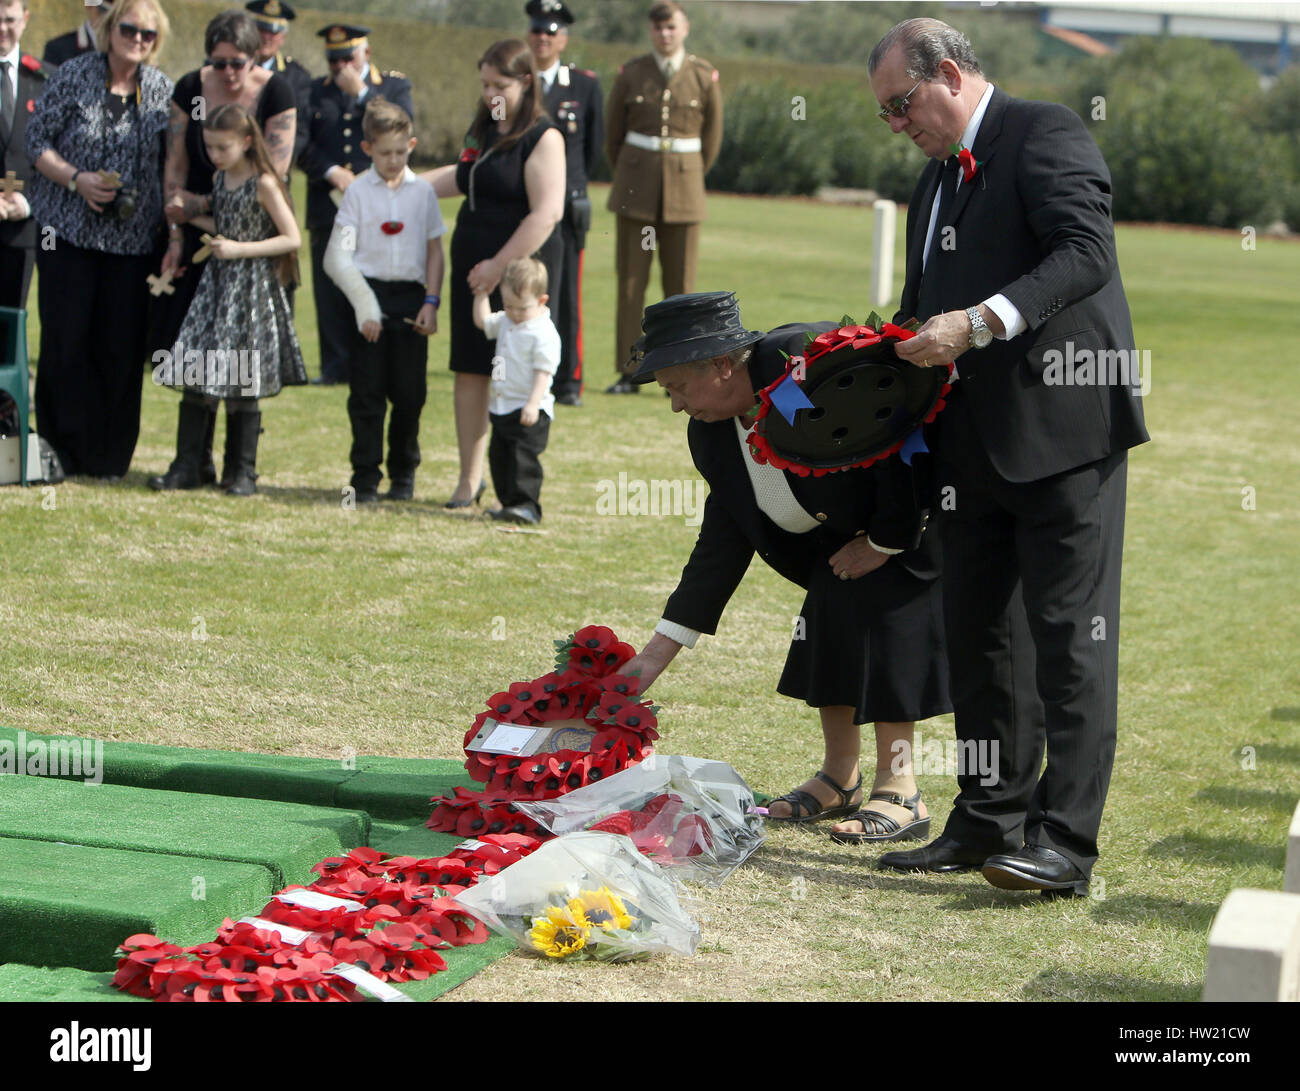 Lance Corporal Ronald George Blackham's sister Alma Williams and nephew Michael Blackham lay a wreath during the burial service for Lance Corporal Ronald George Blackham from Northwich, Cheshire and two unknown soldiers at the Commonwealth War Graves Commission (CWGC) Salerno War Cemetery, in Italy, who were all killed in WWII, during a fierce battle on 25 September 1943 on Hill 270, near the village of Capezzano. Stock Photo